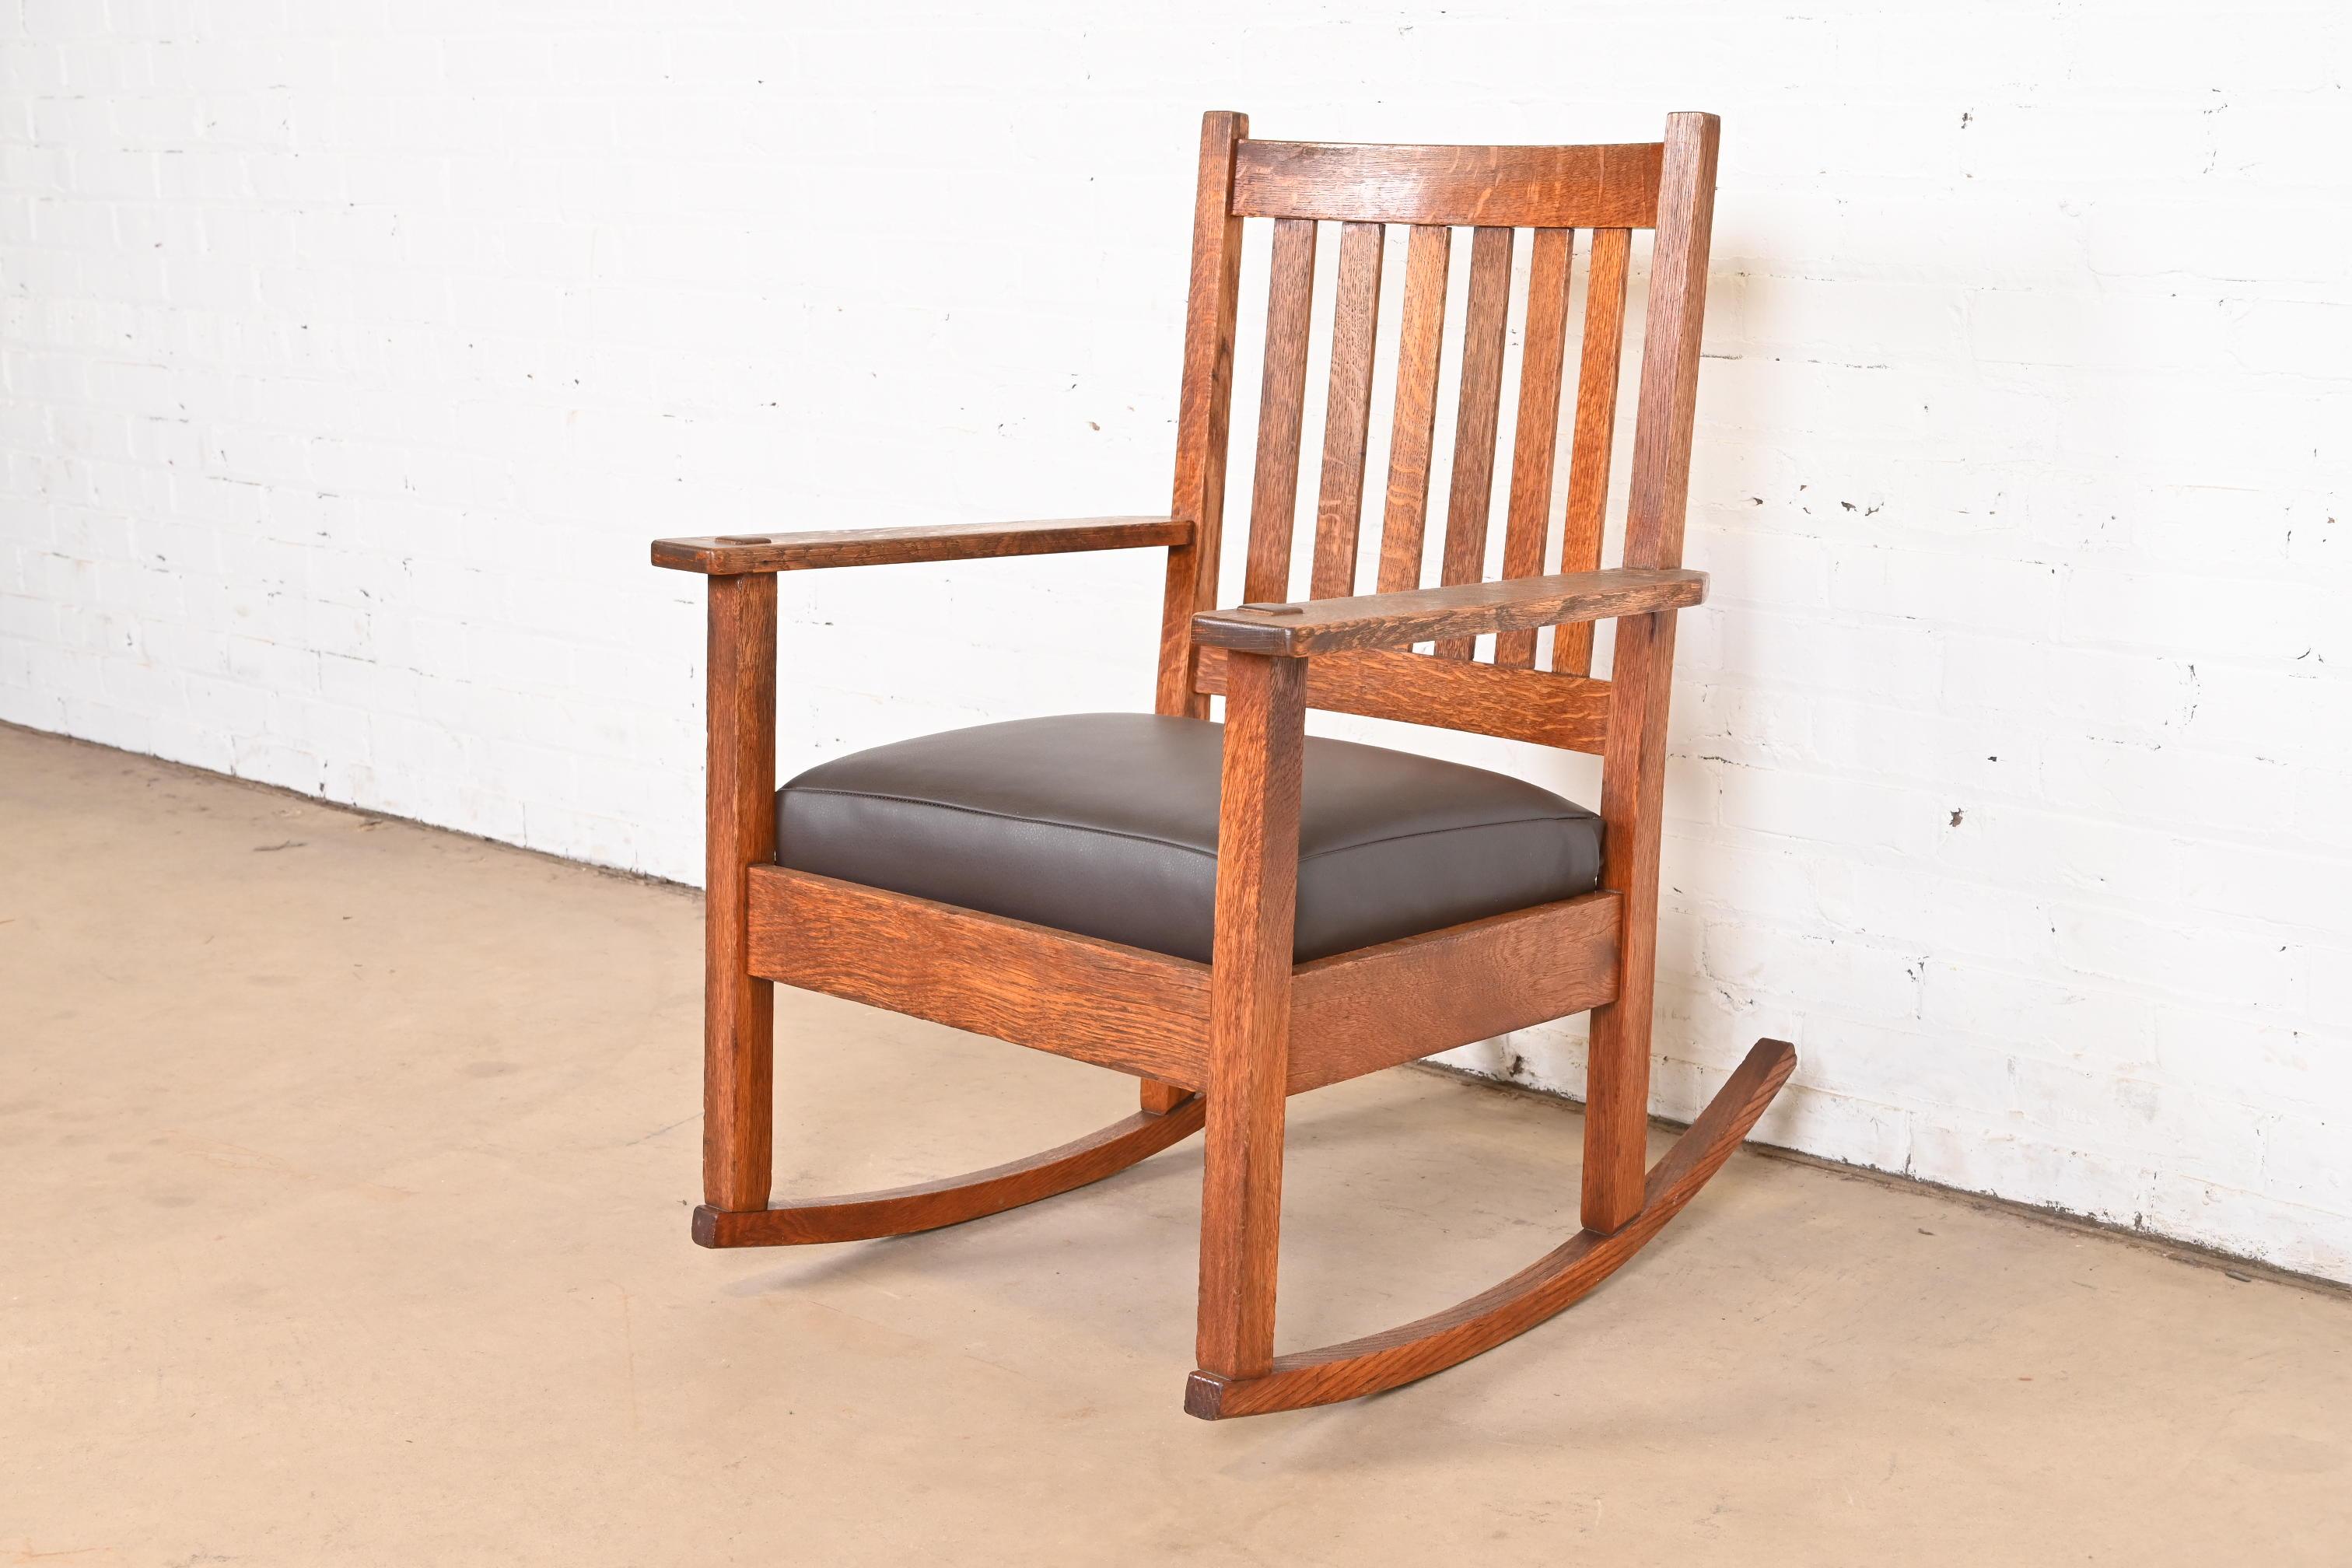 Stickley Brothers Antique Mission Oak Arts & Crafts Rocking Chair, Circa 1900 In Good Condition For Sale In South Bend, IN